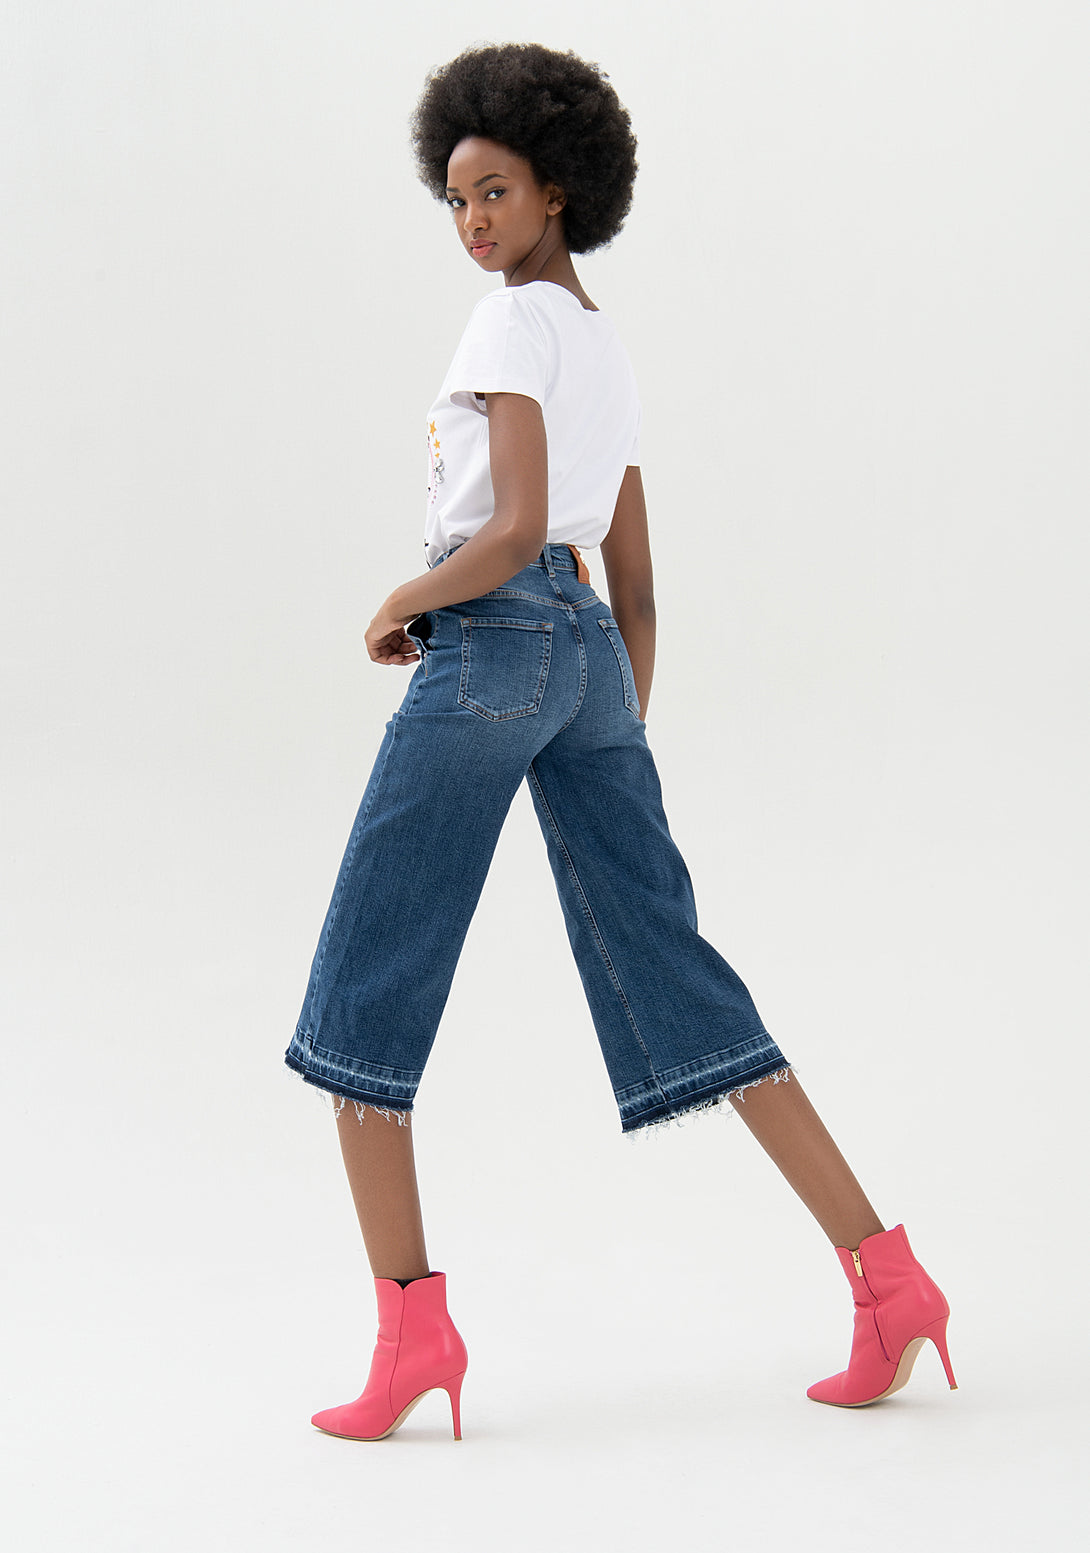 Culotte jeans cropped made in denim with middle wash